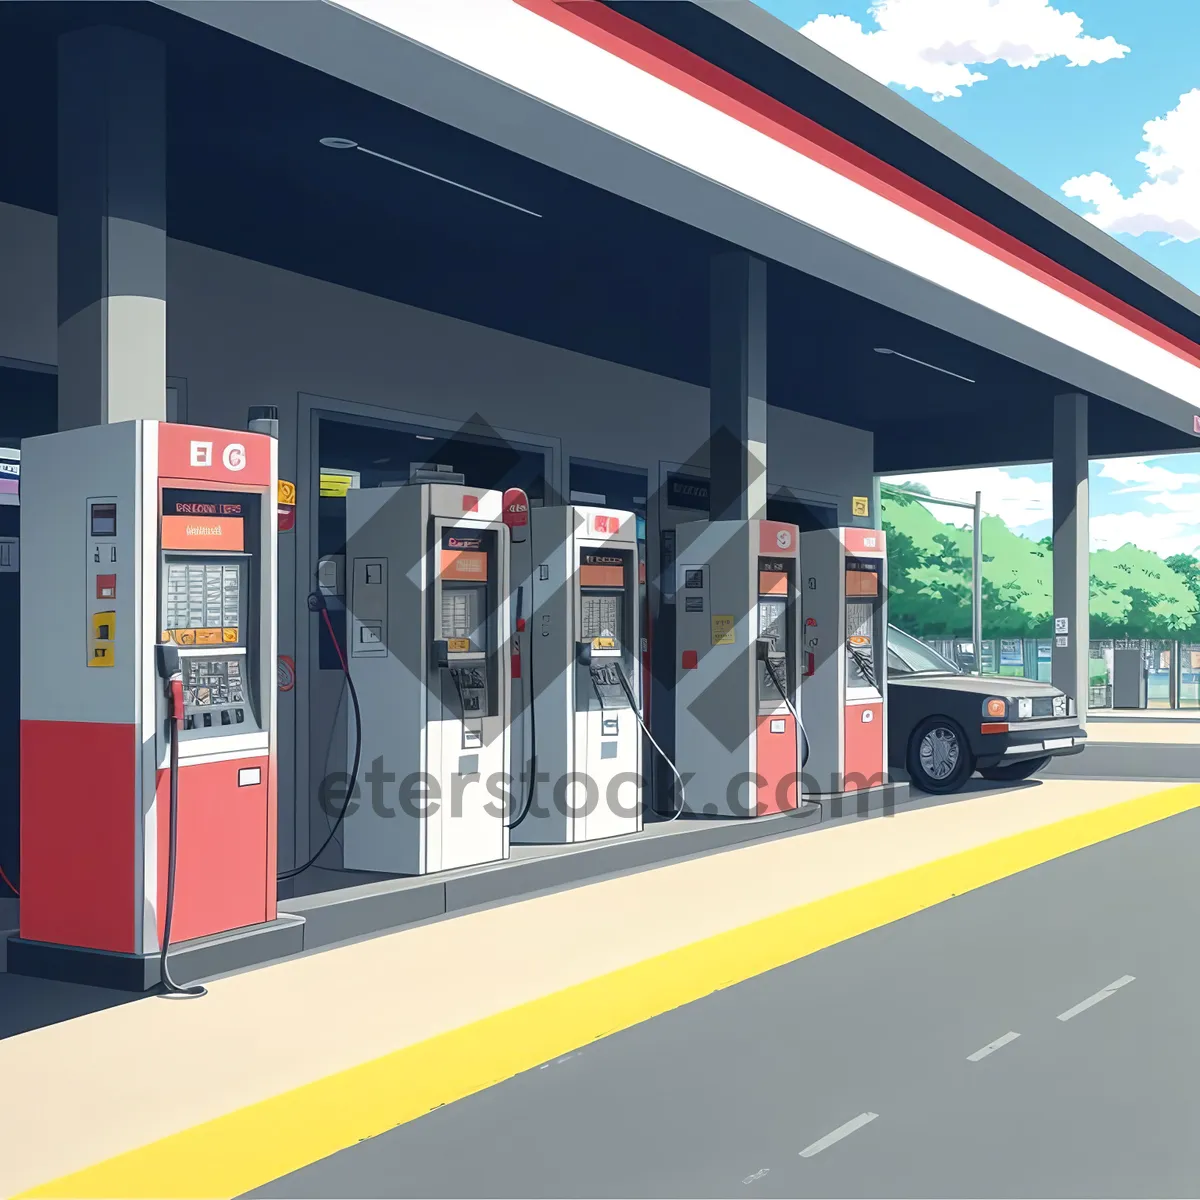 Picture of Mechanical Gas Pump Machine for Business Office Station